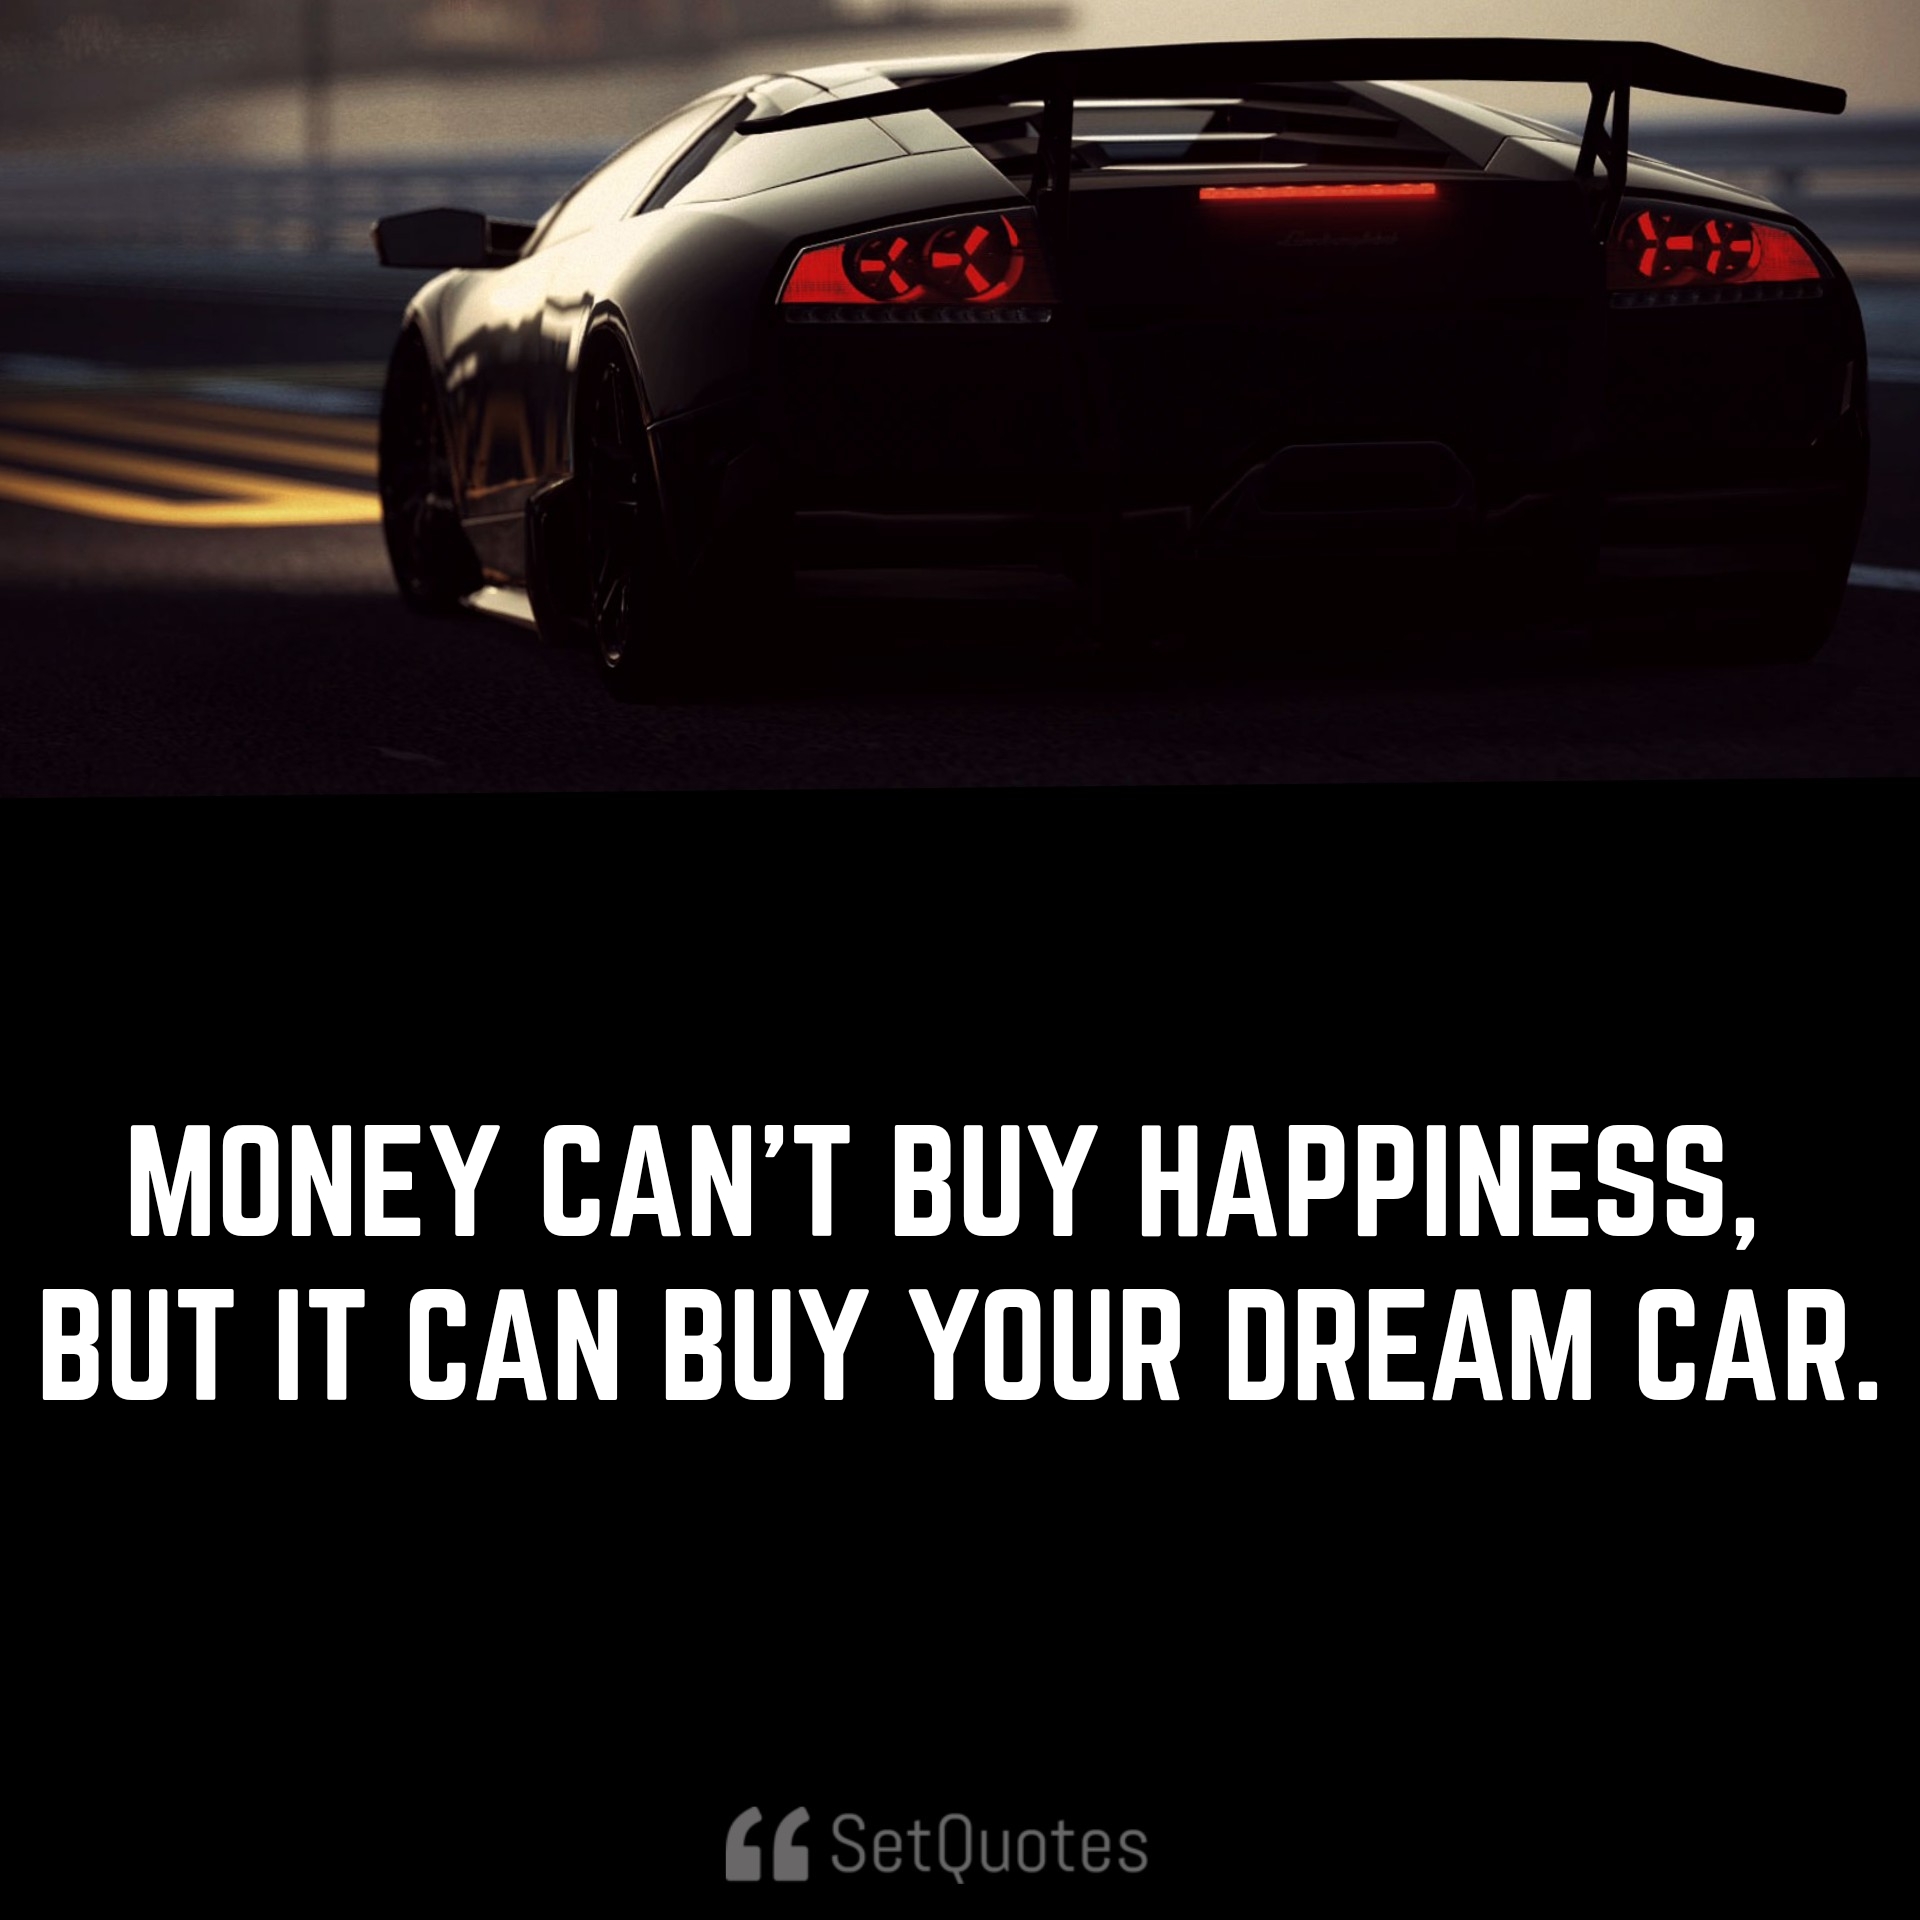 Money can’t buy happiness, but it can buy your dream car. - Money Doesn't Buy Happiness quotes